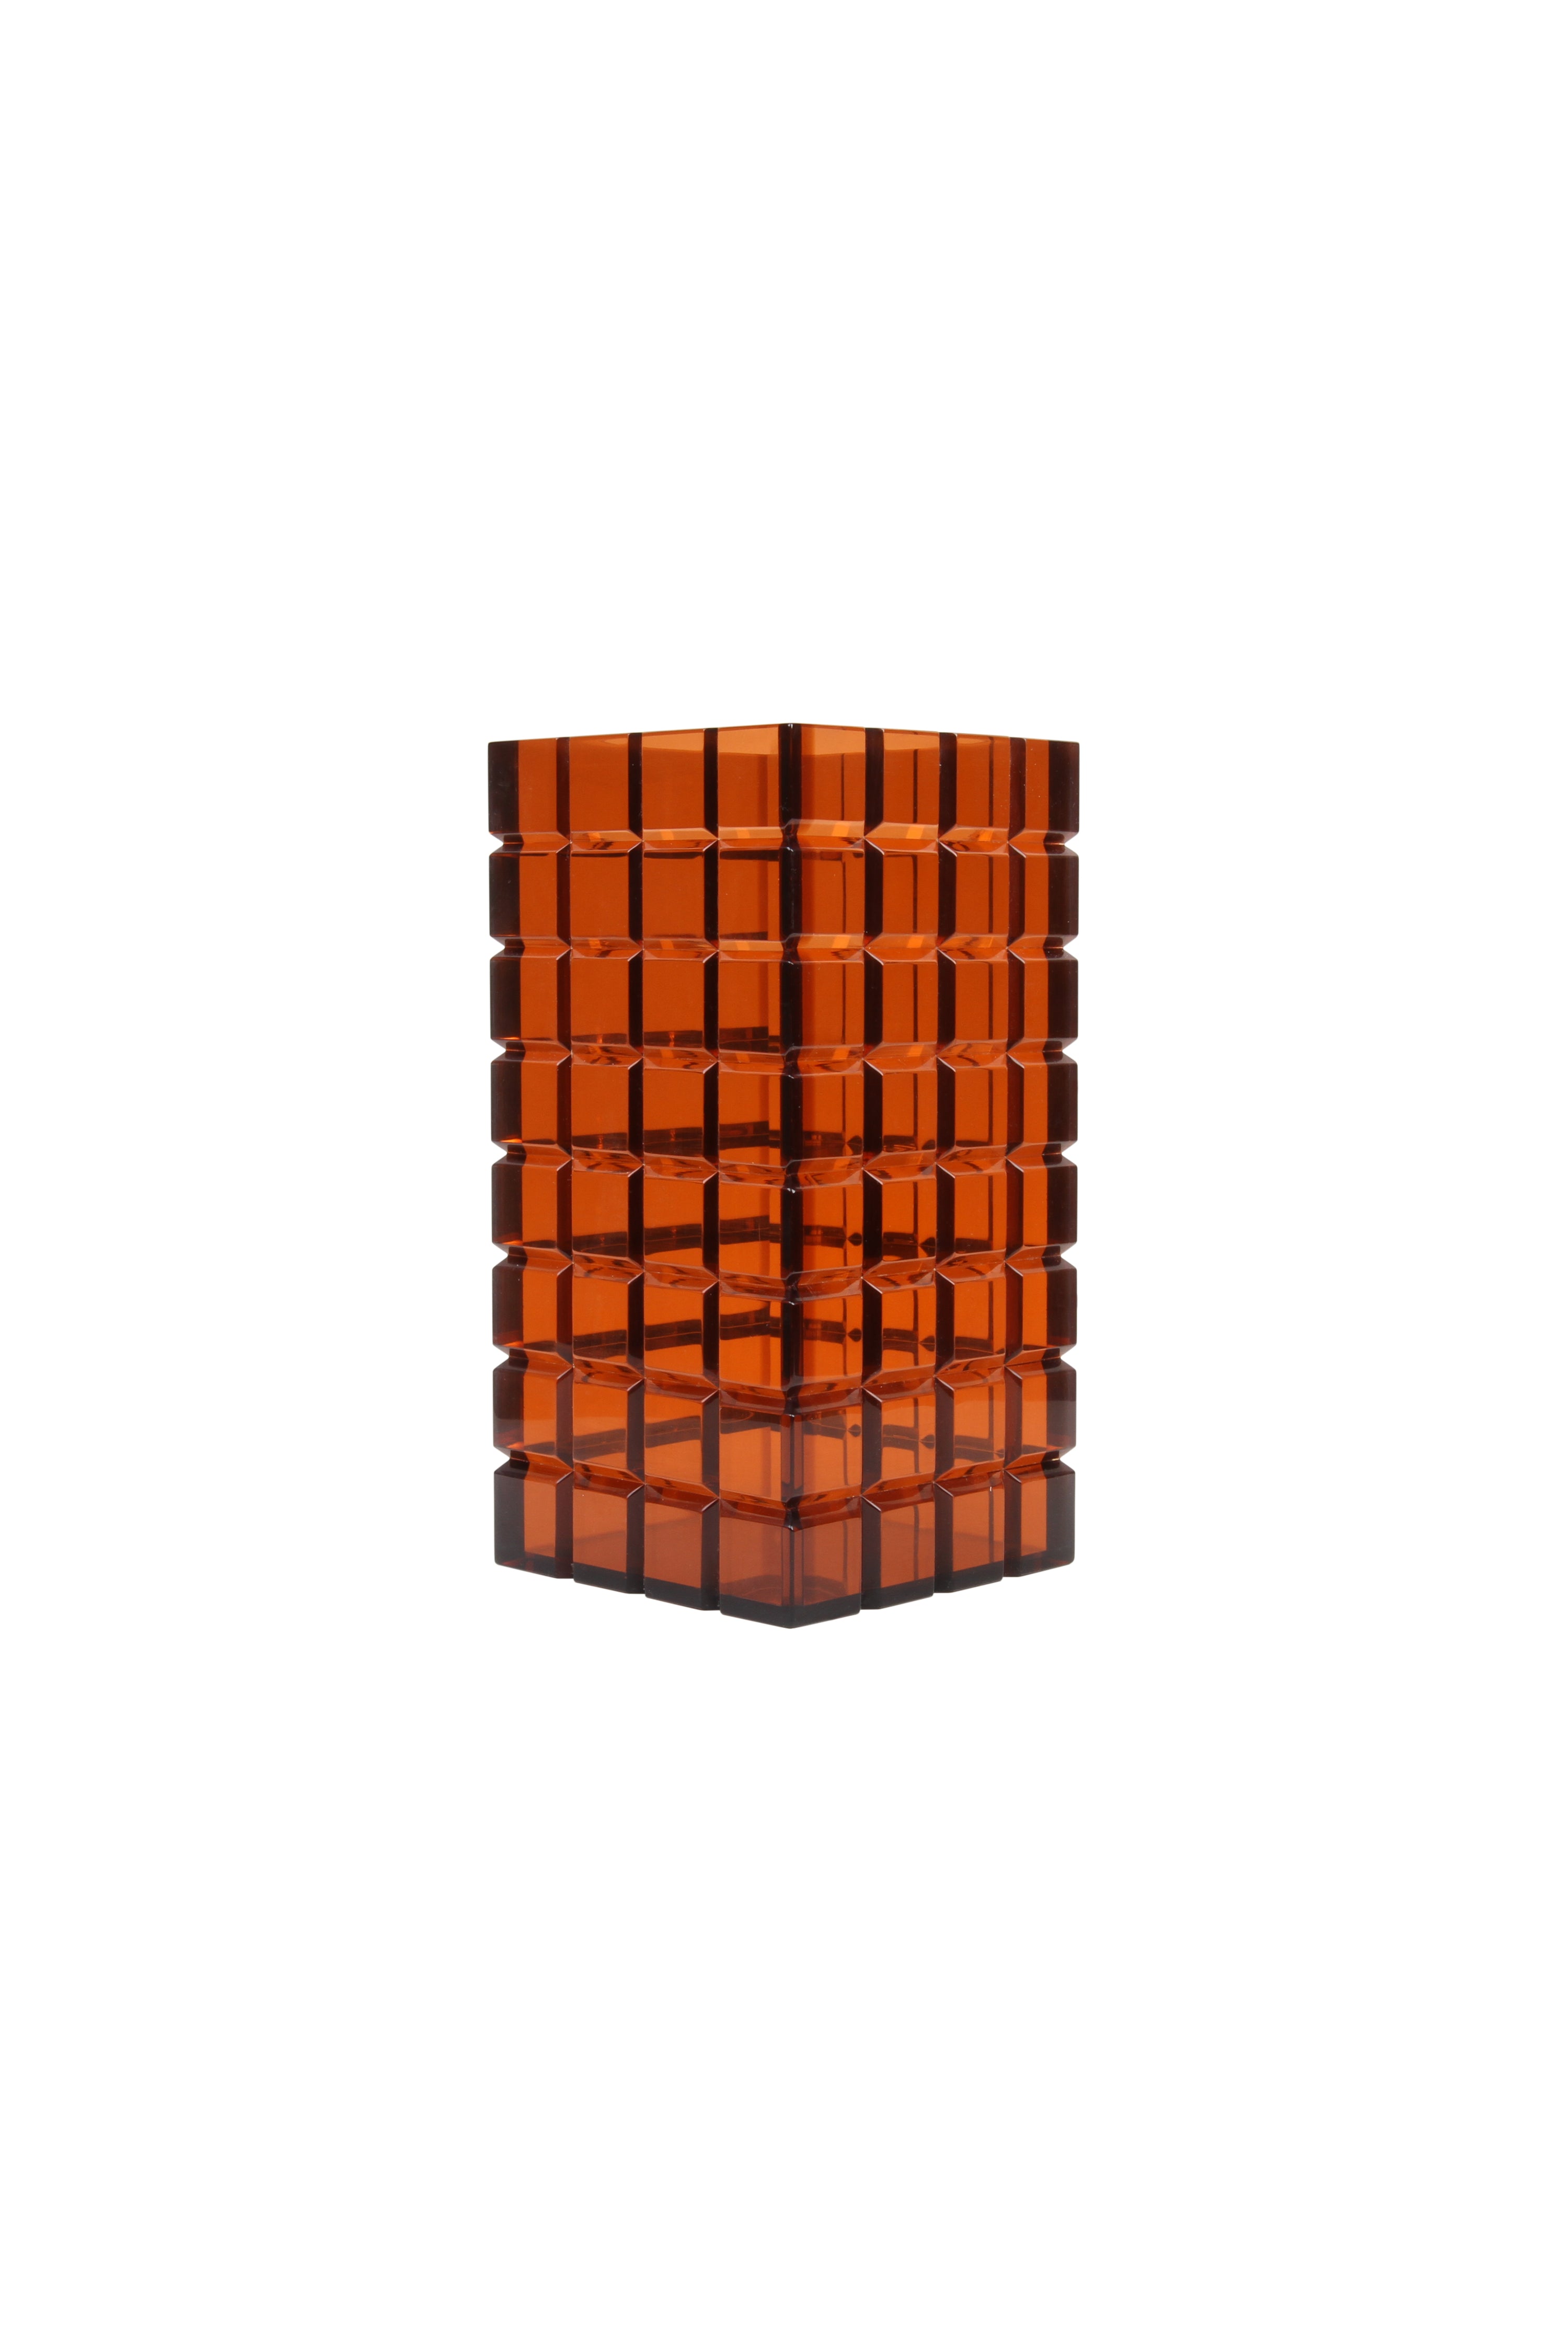 The LOU LOU vase in Amber